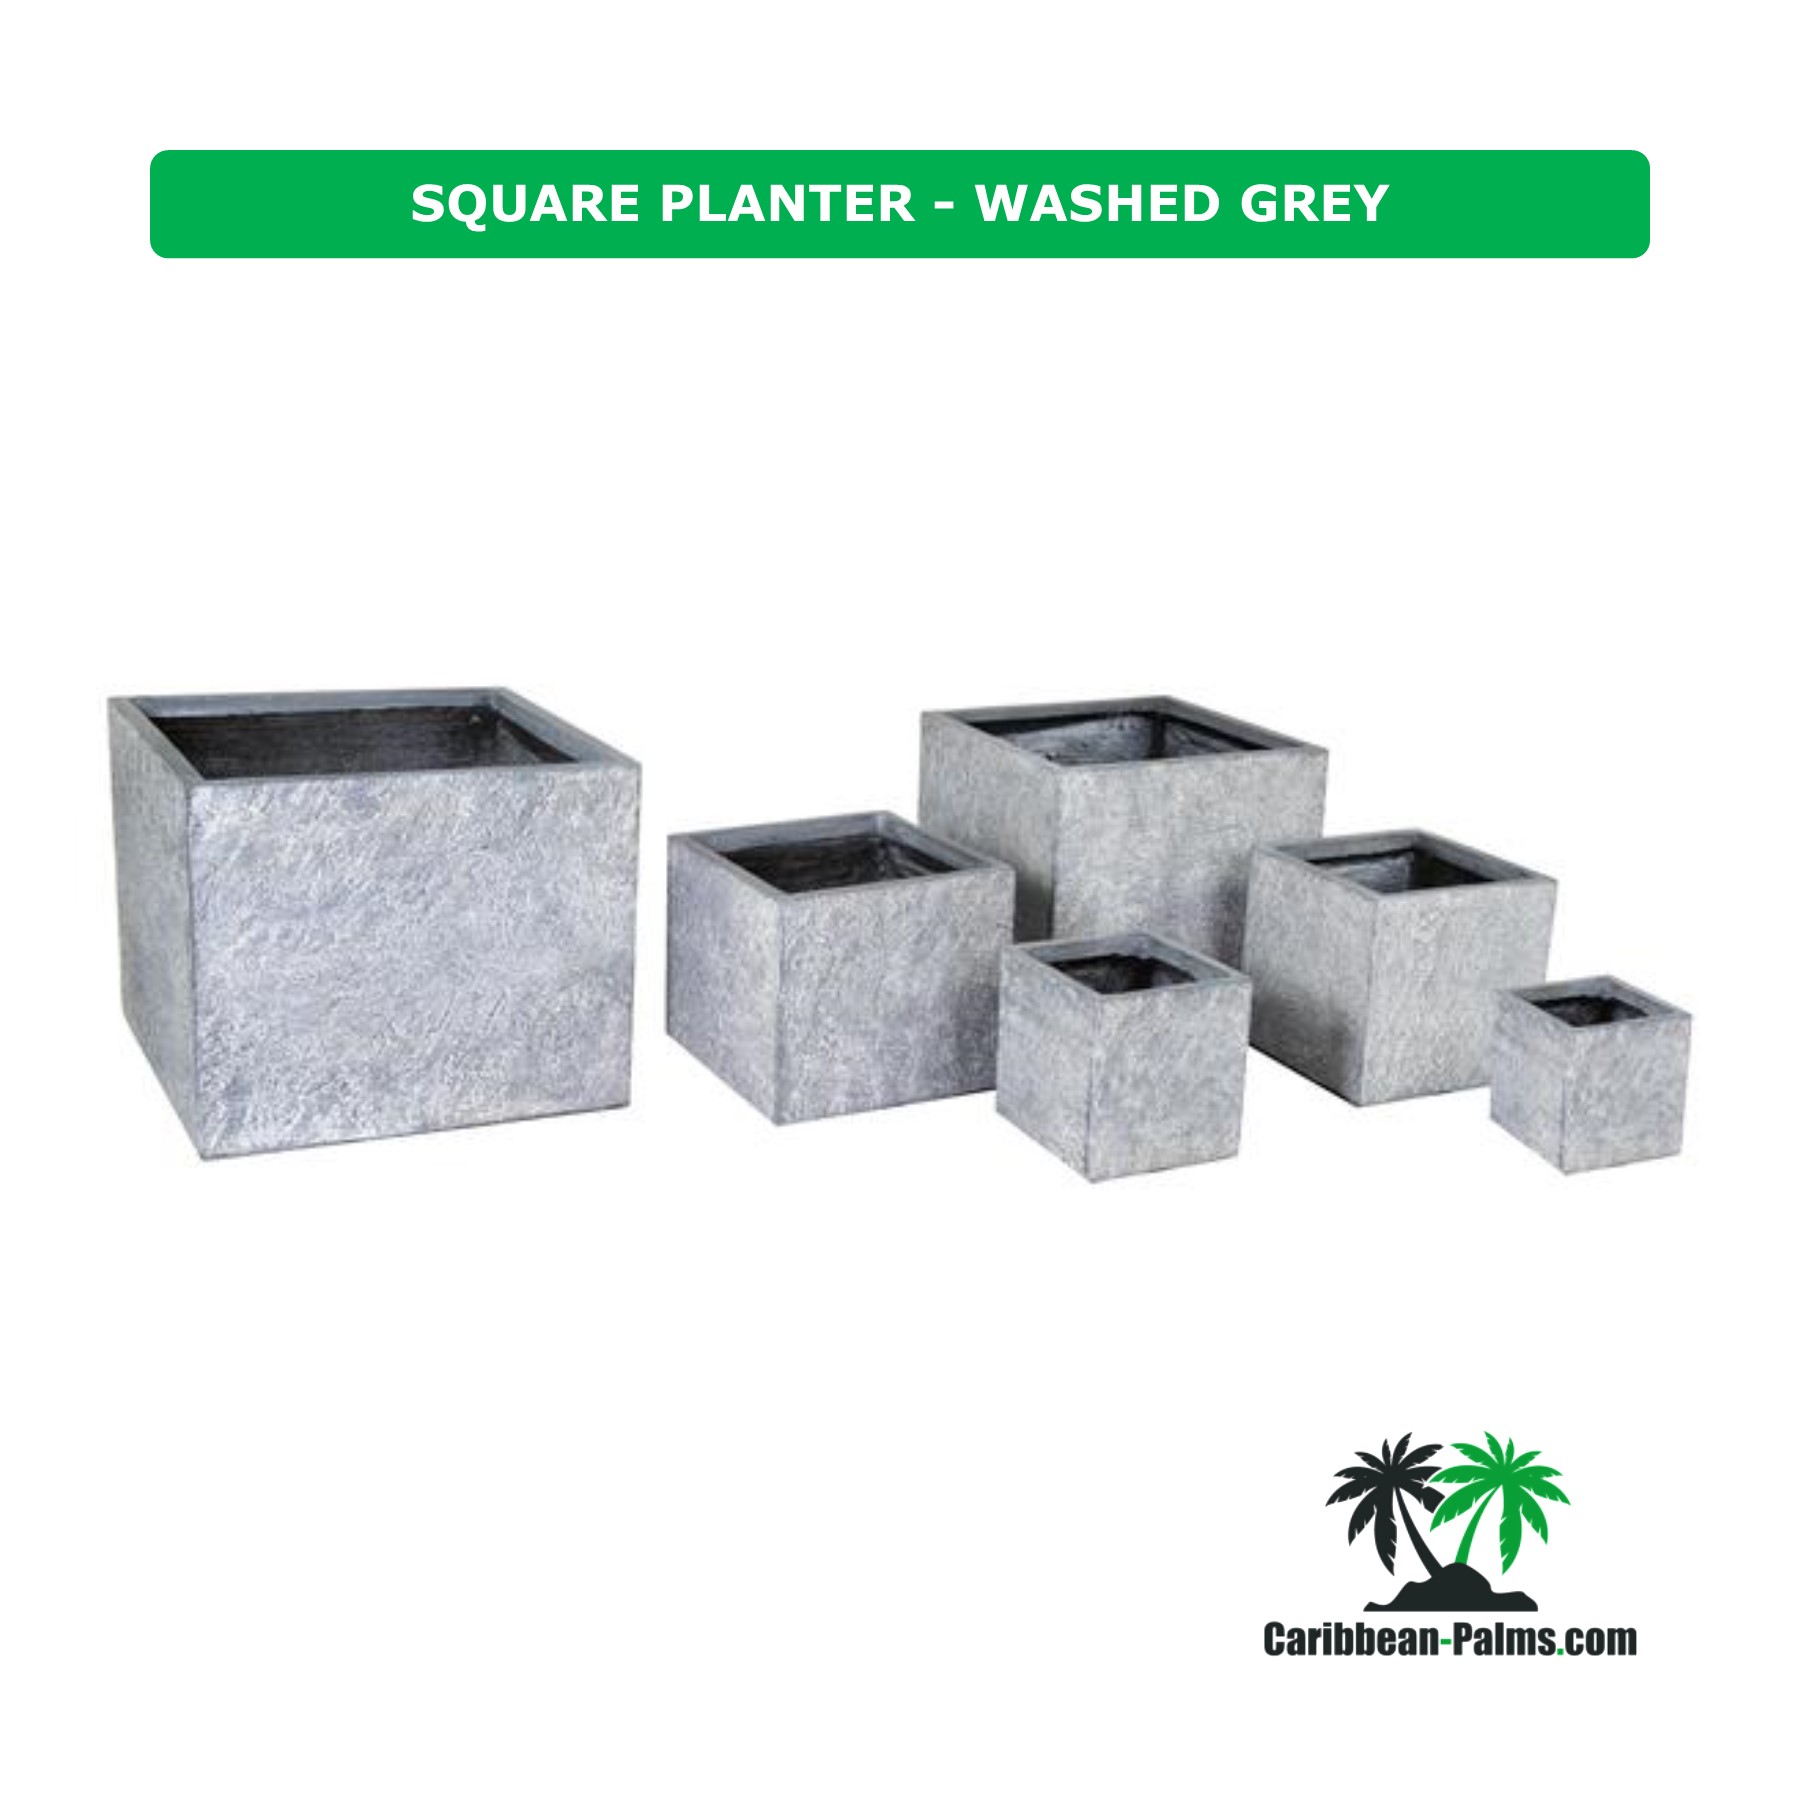 SQUARE PLANTER WASHED GREY